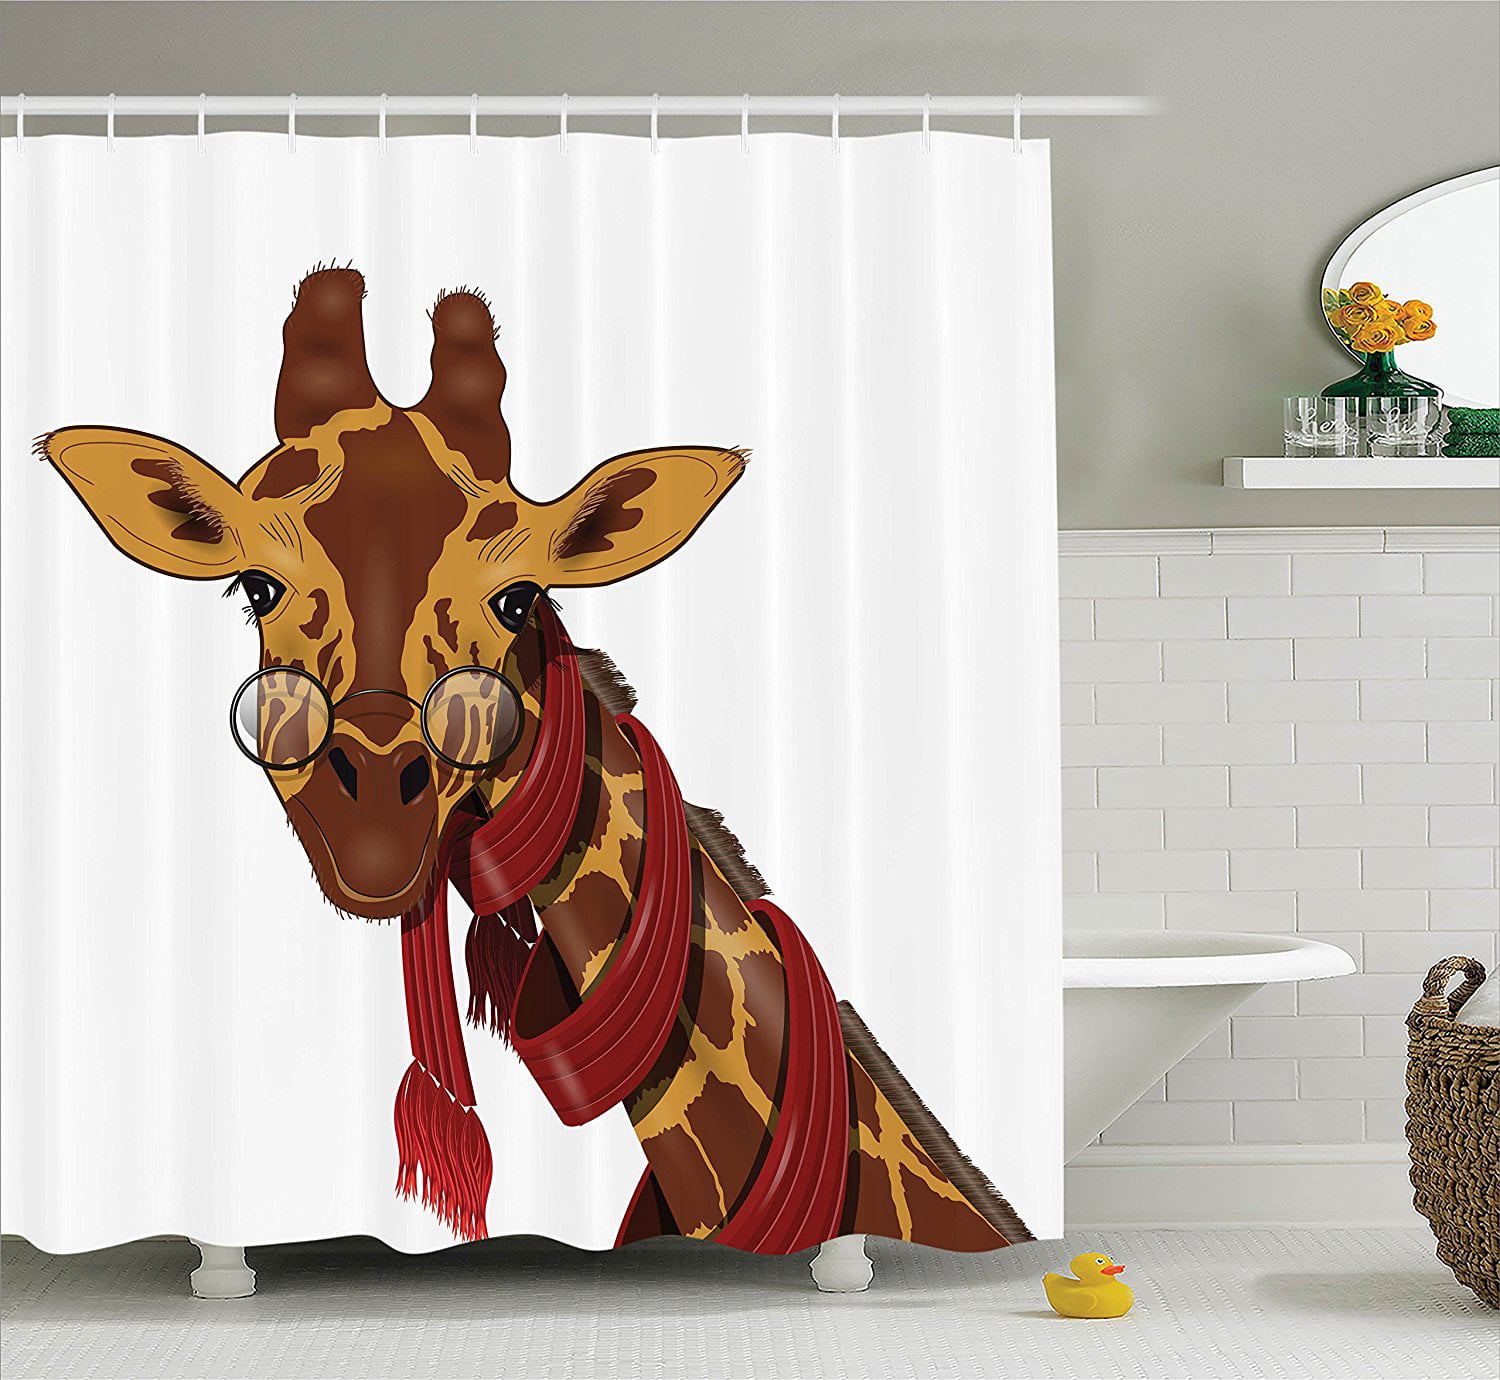 Funny Giraffe with Red Hat Shower Curtain Liner Bathroom Polyester Fabric Hooks 